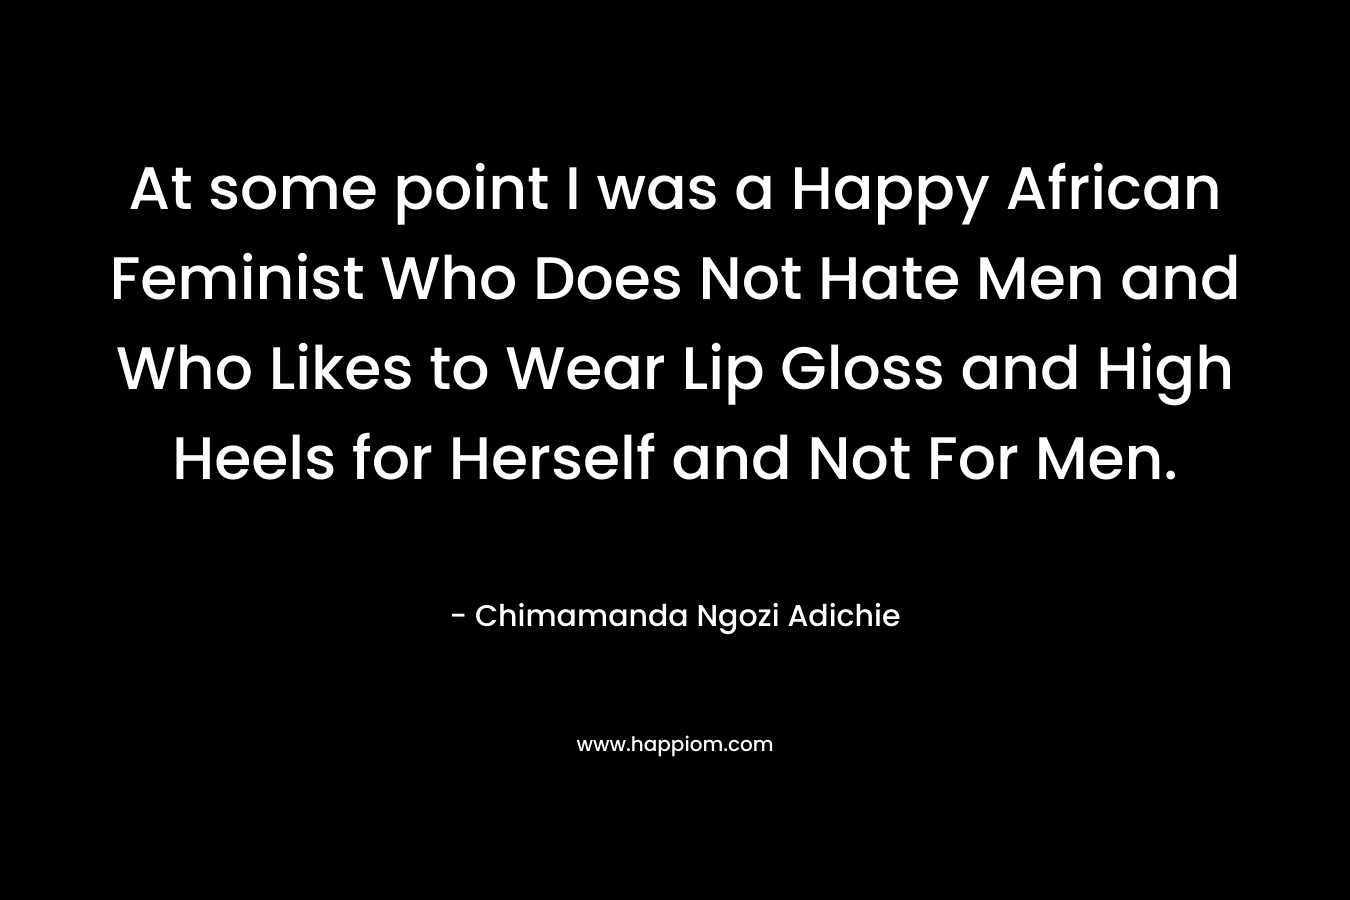 At some point I was a Happy African Feminist Who Does Not Hate Men and Who Likes to Wear Lip Gloss and High Heels for Herself and Not For Men. – Chimamanda Ngozi Adichie